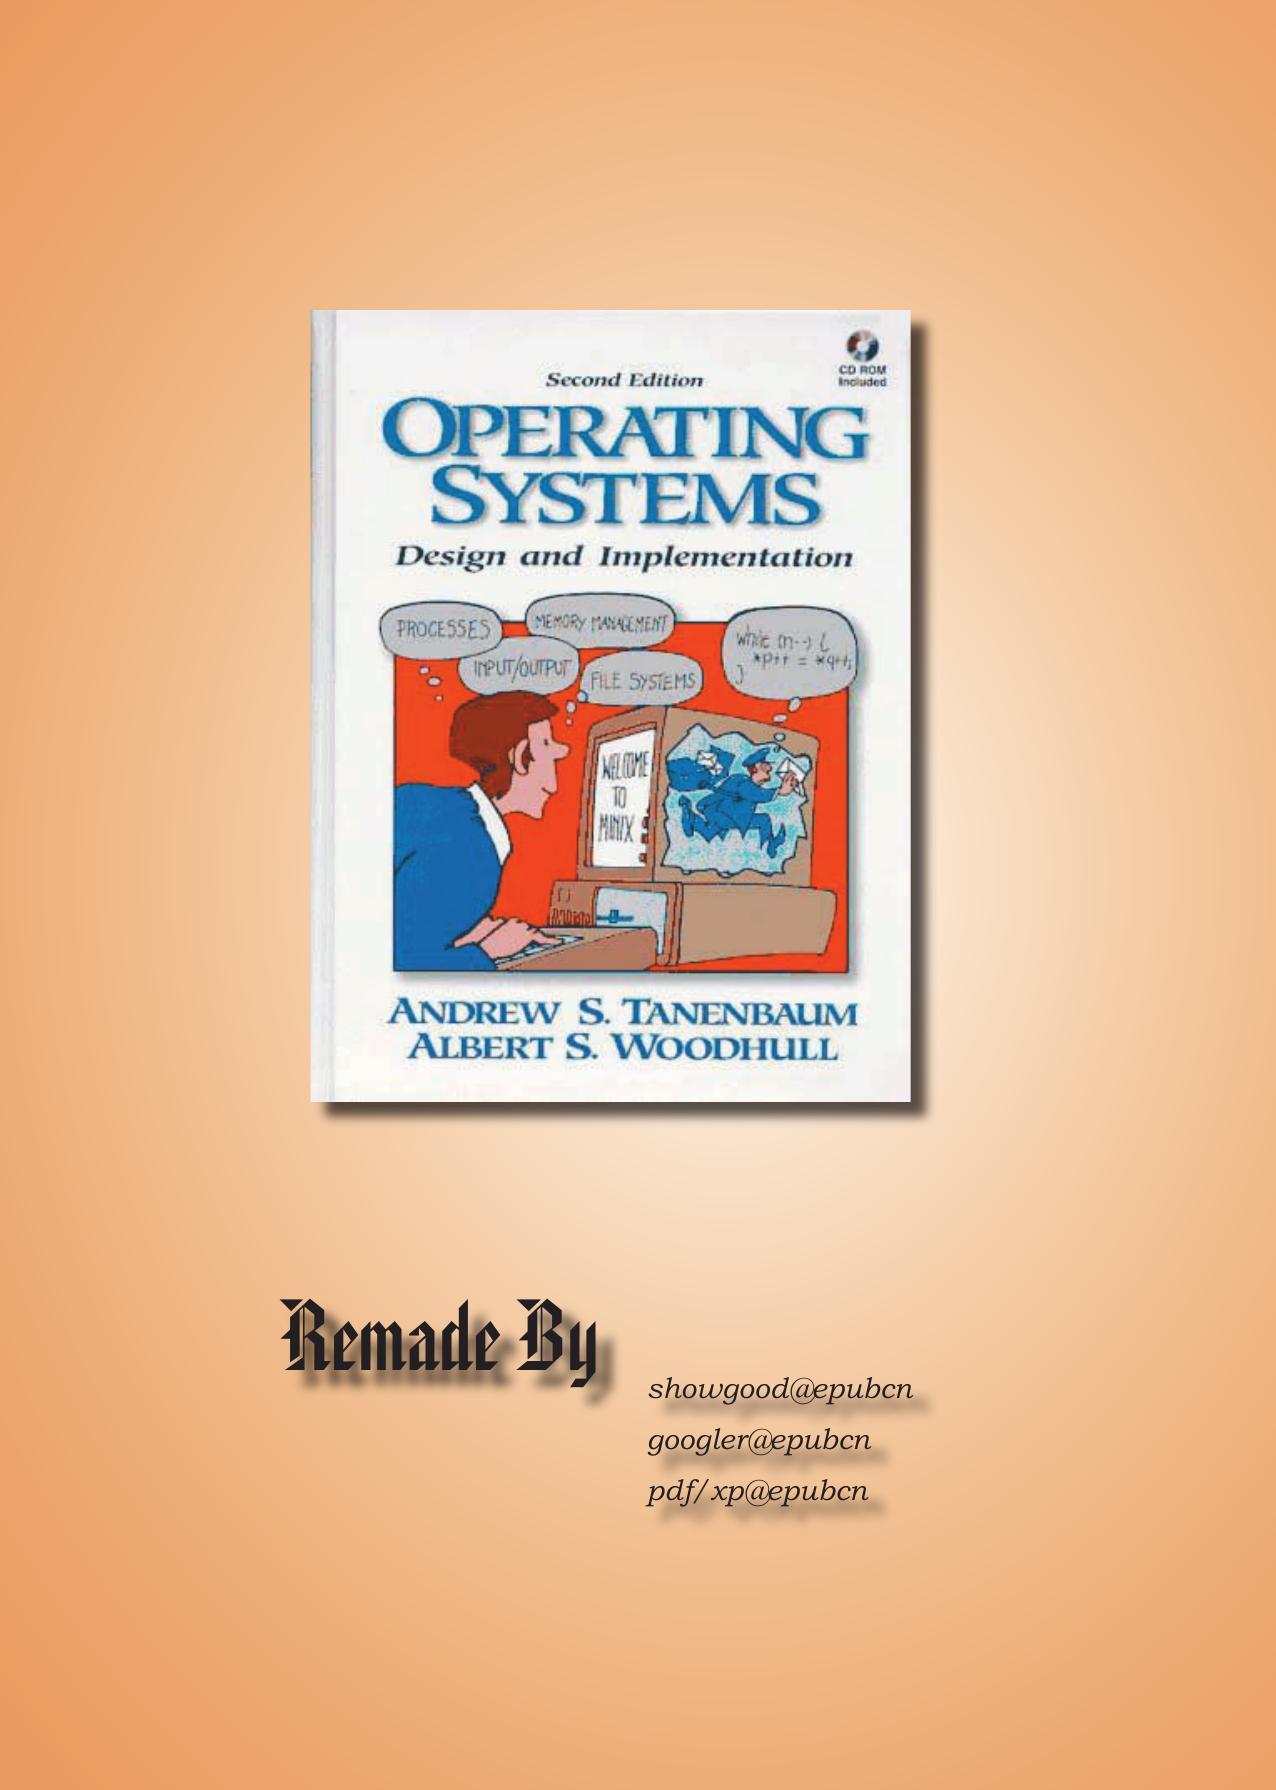 Operating System-Design and Implementation